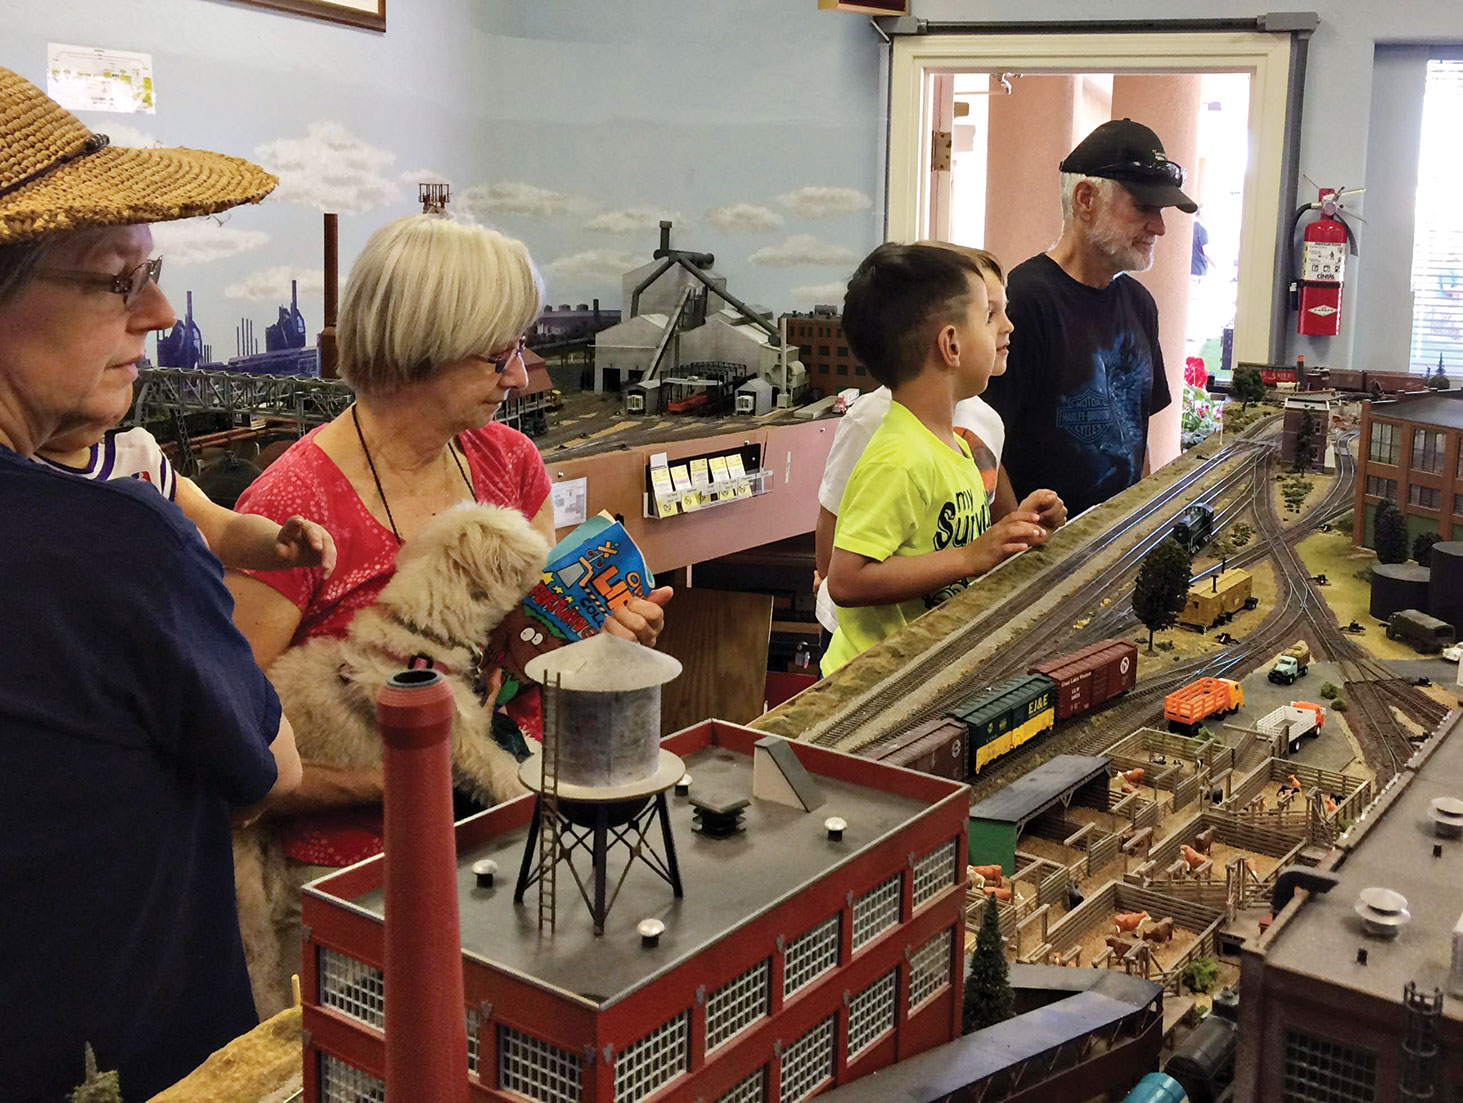 Even the family dog came to the PebbleCreek Model Railroad Club Open House.